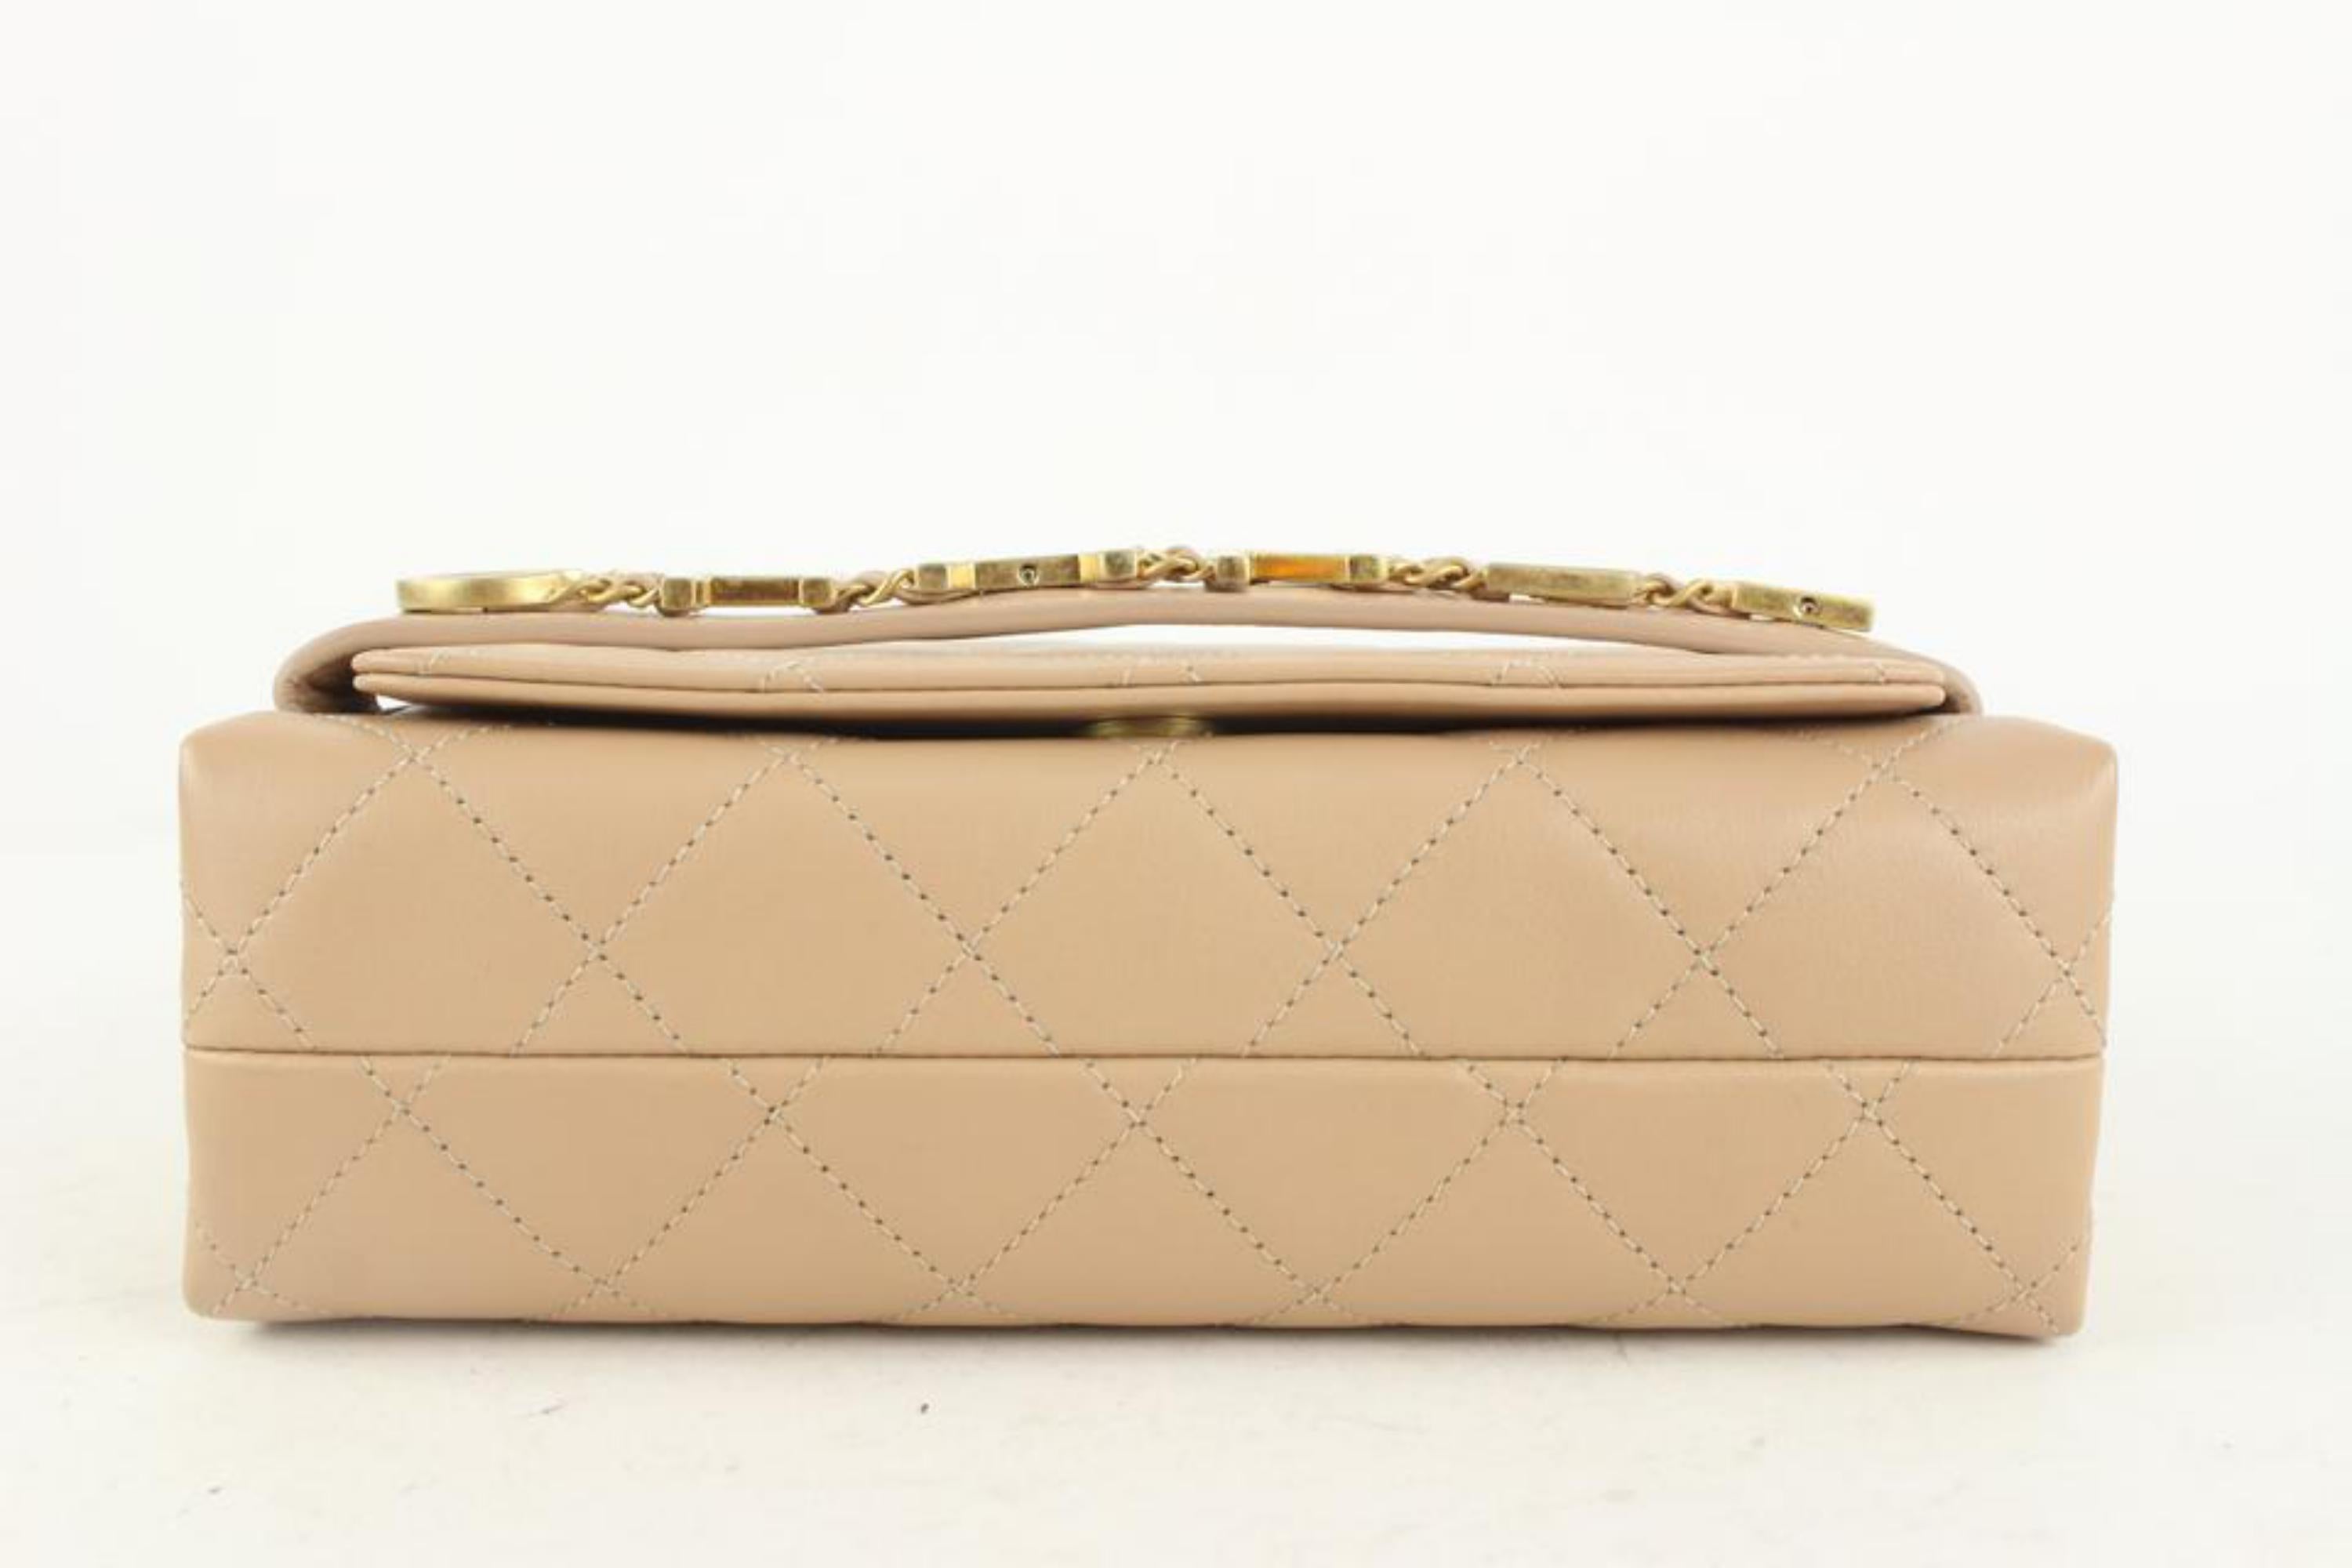 Chanel Quilted Beige Leather Enchained Top Handle Crossbody Flap Bag 1111C27 For Sale 1